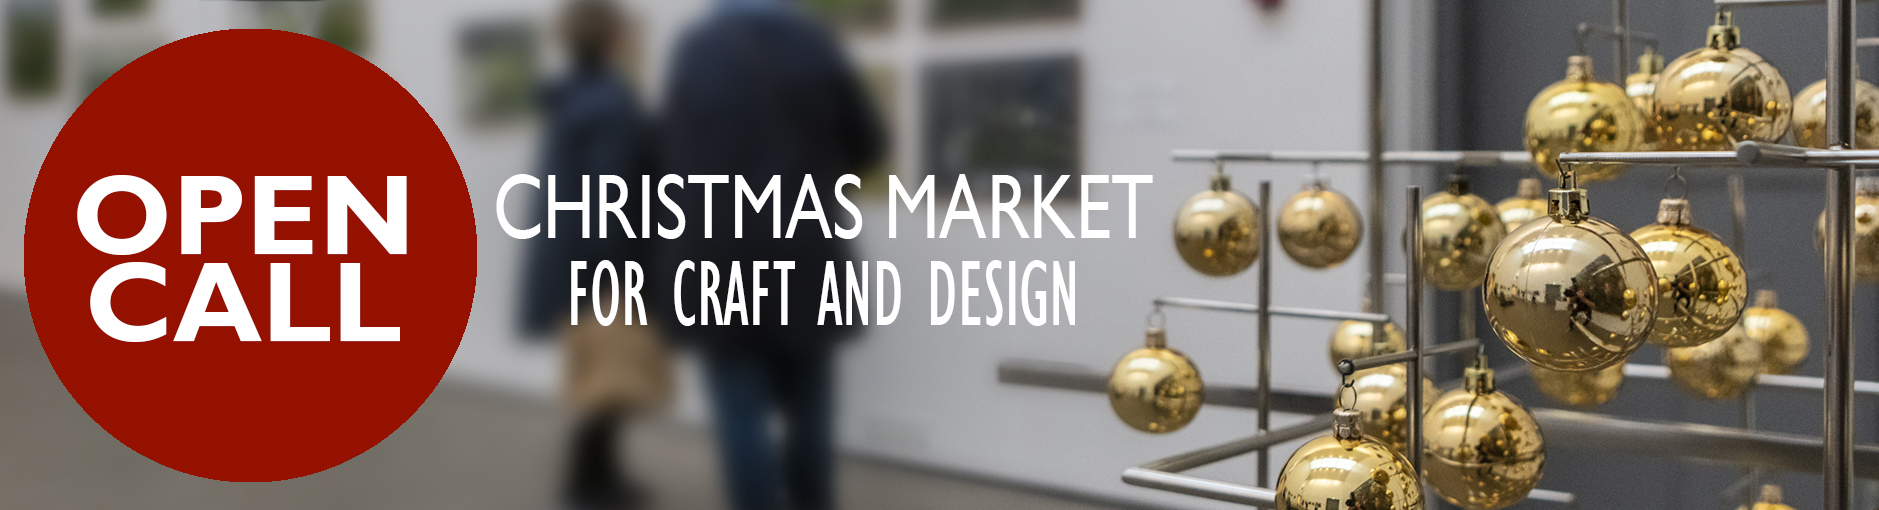 Christmas market for Craft and Design - Open Call